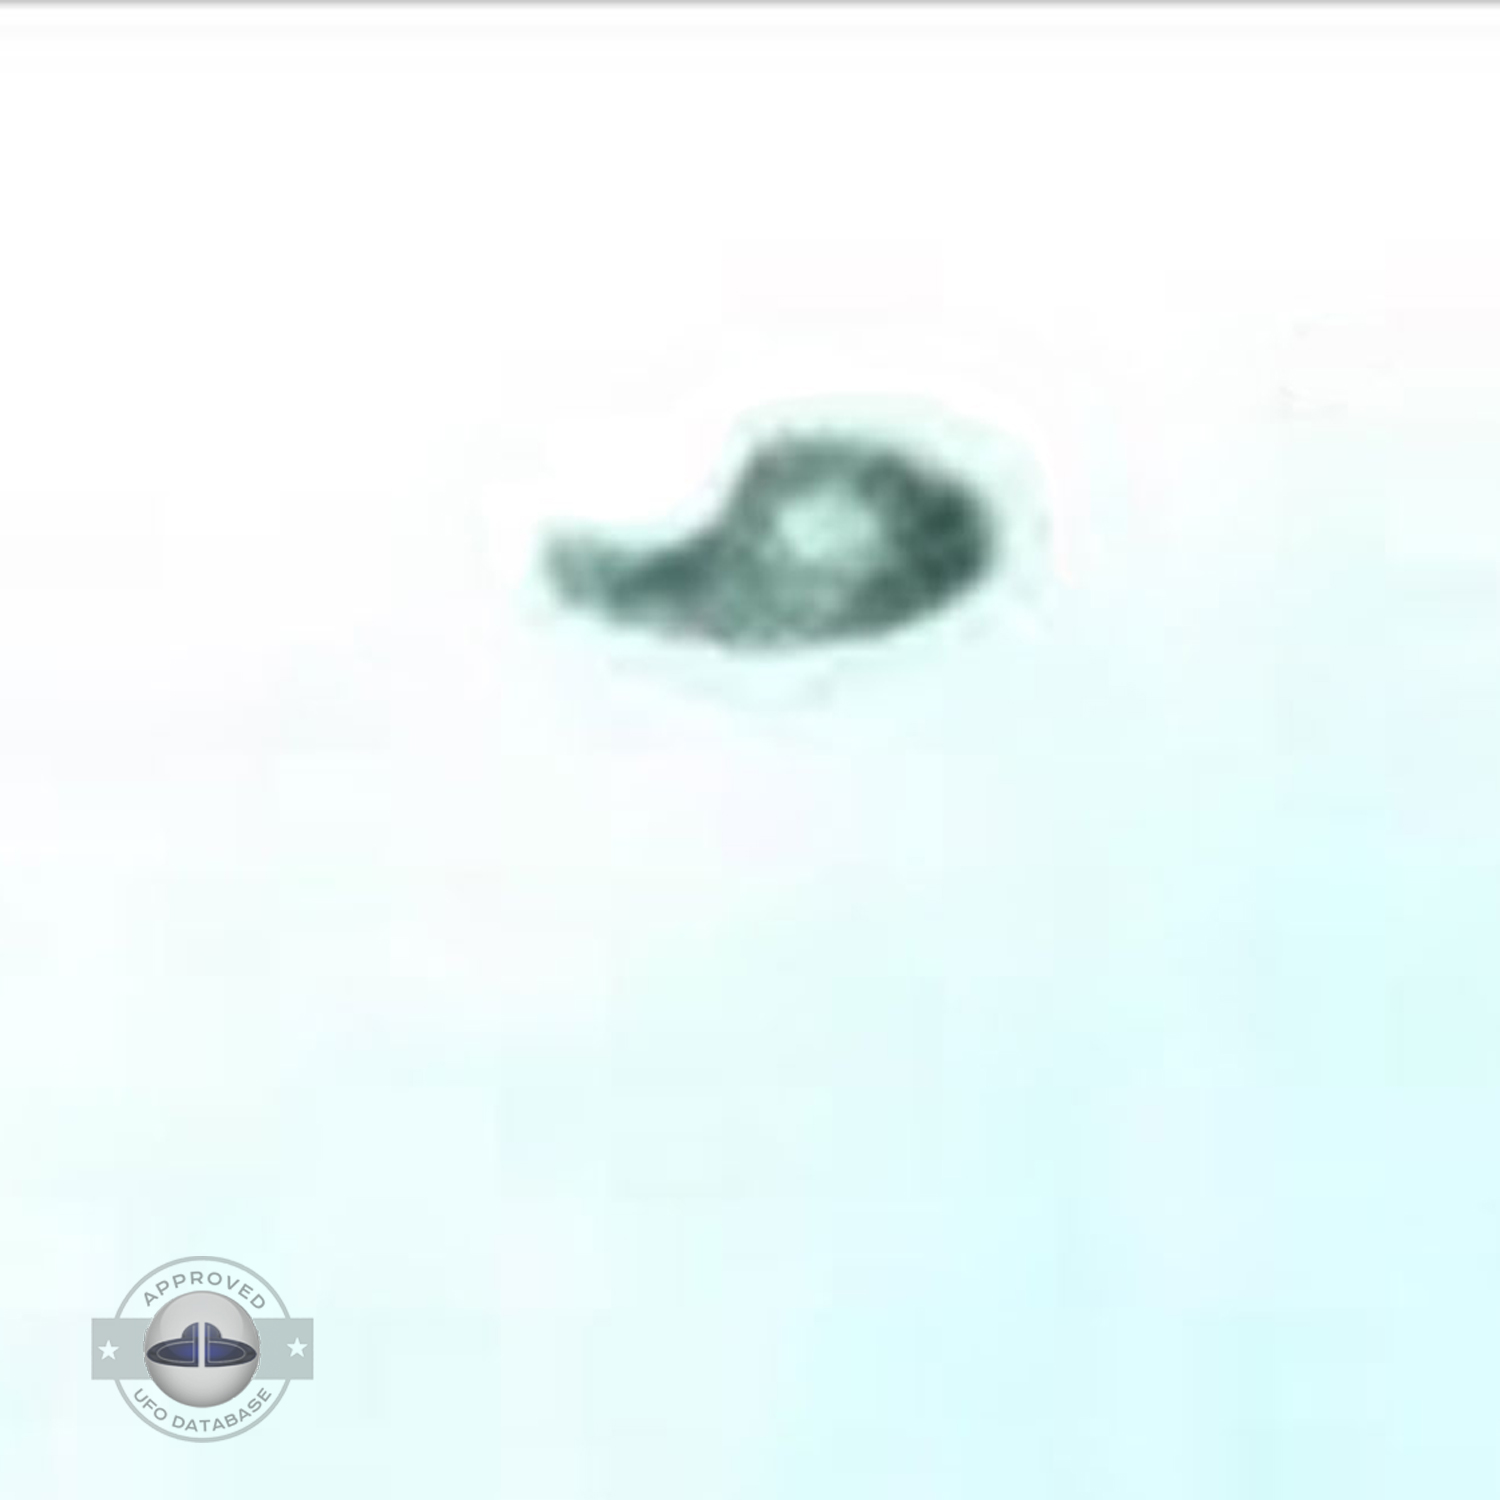 UFO picture was shot from the roof of an building in New York City UFO Picture #105-3